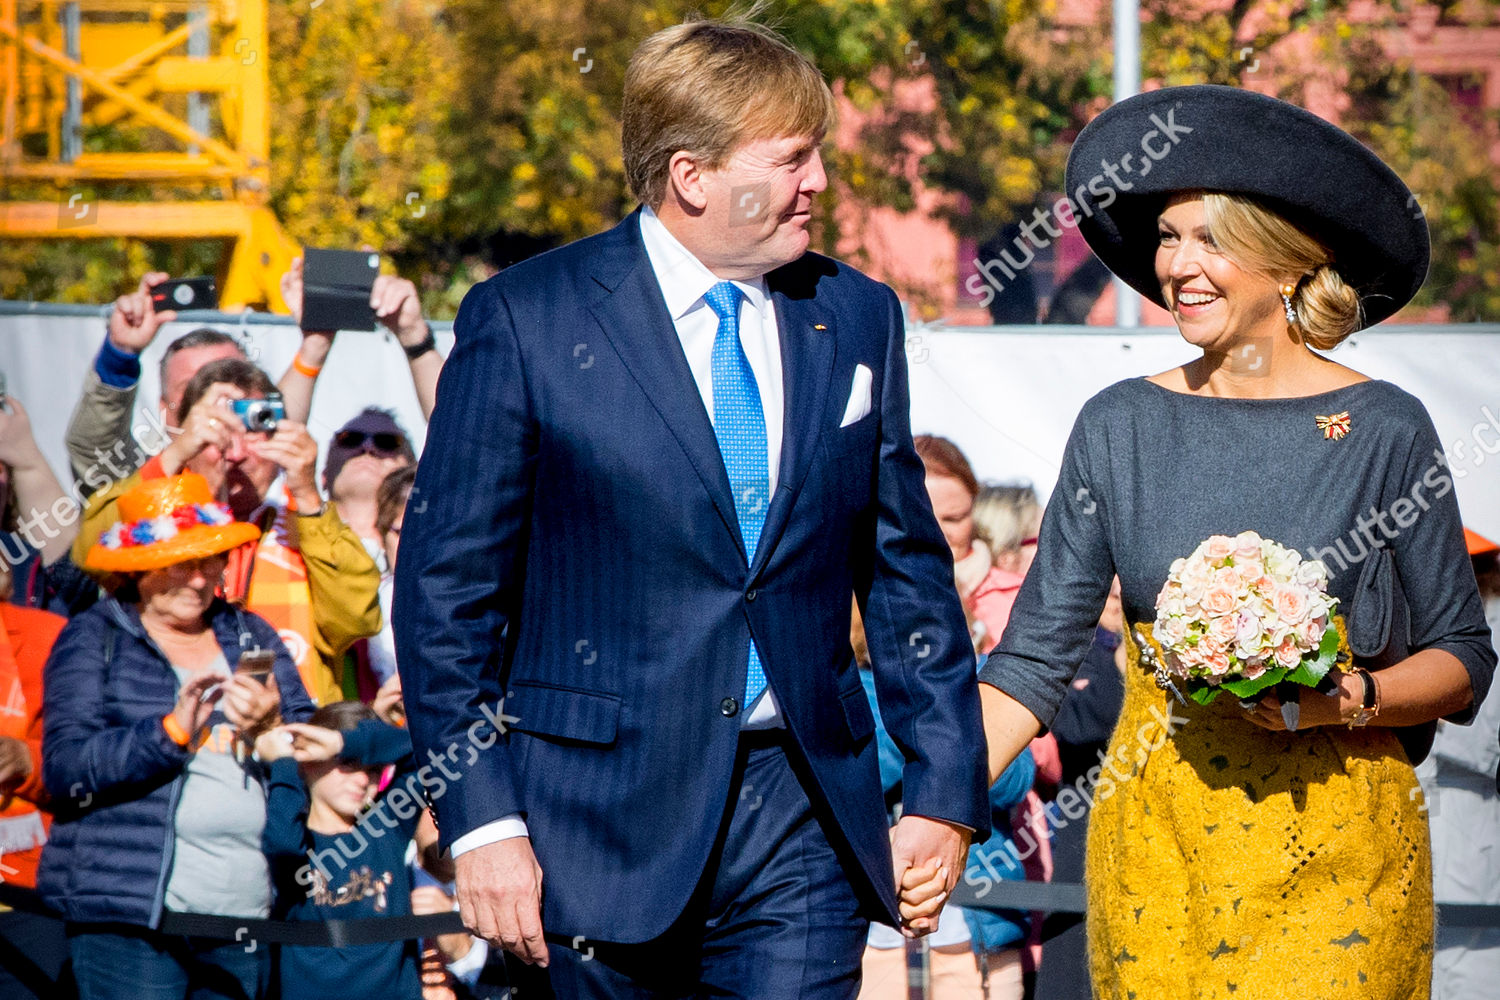 king-willem-alexander-and-queen-maxima-visit-to-germany-shutterstock-editorial-9921319aa.jpg